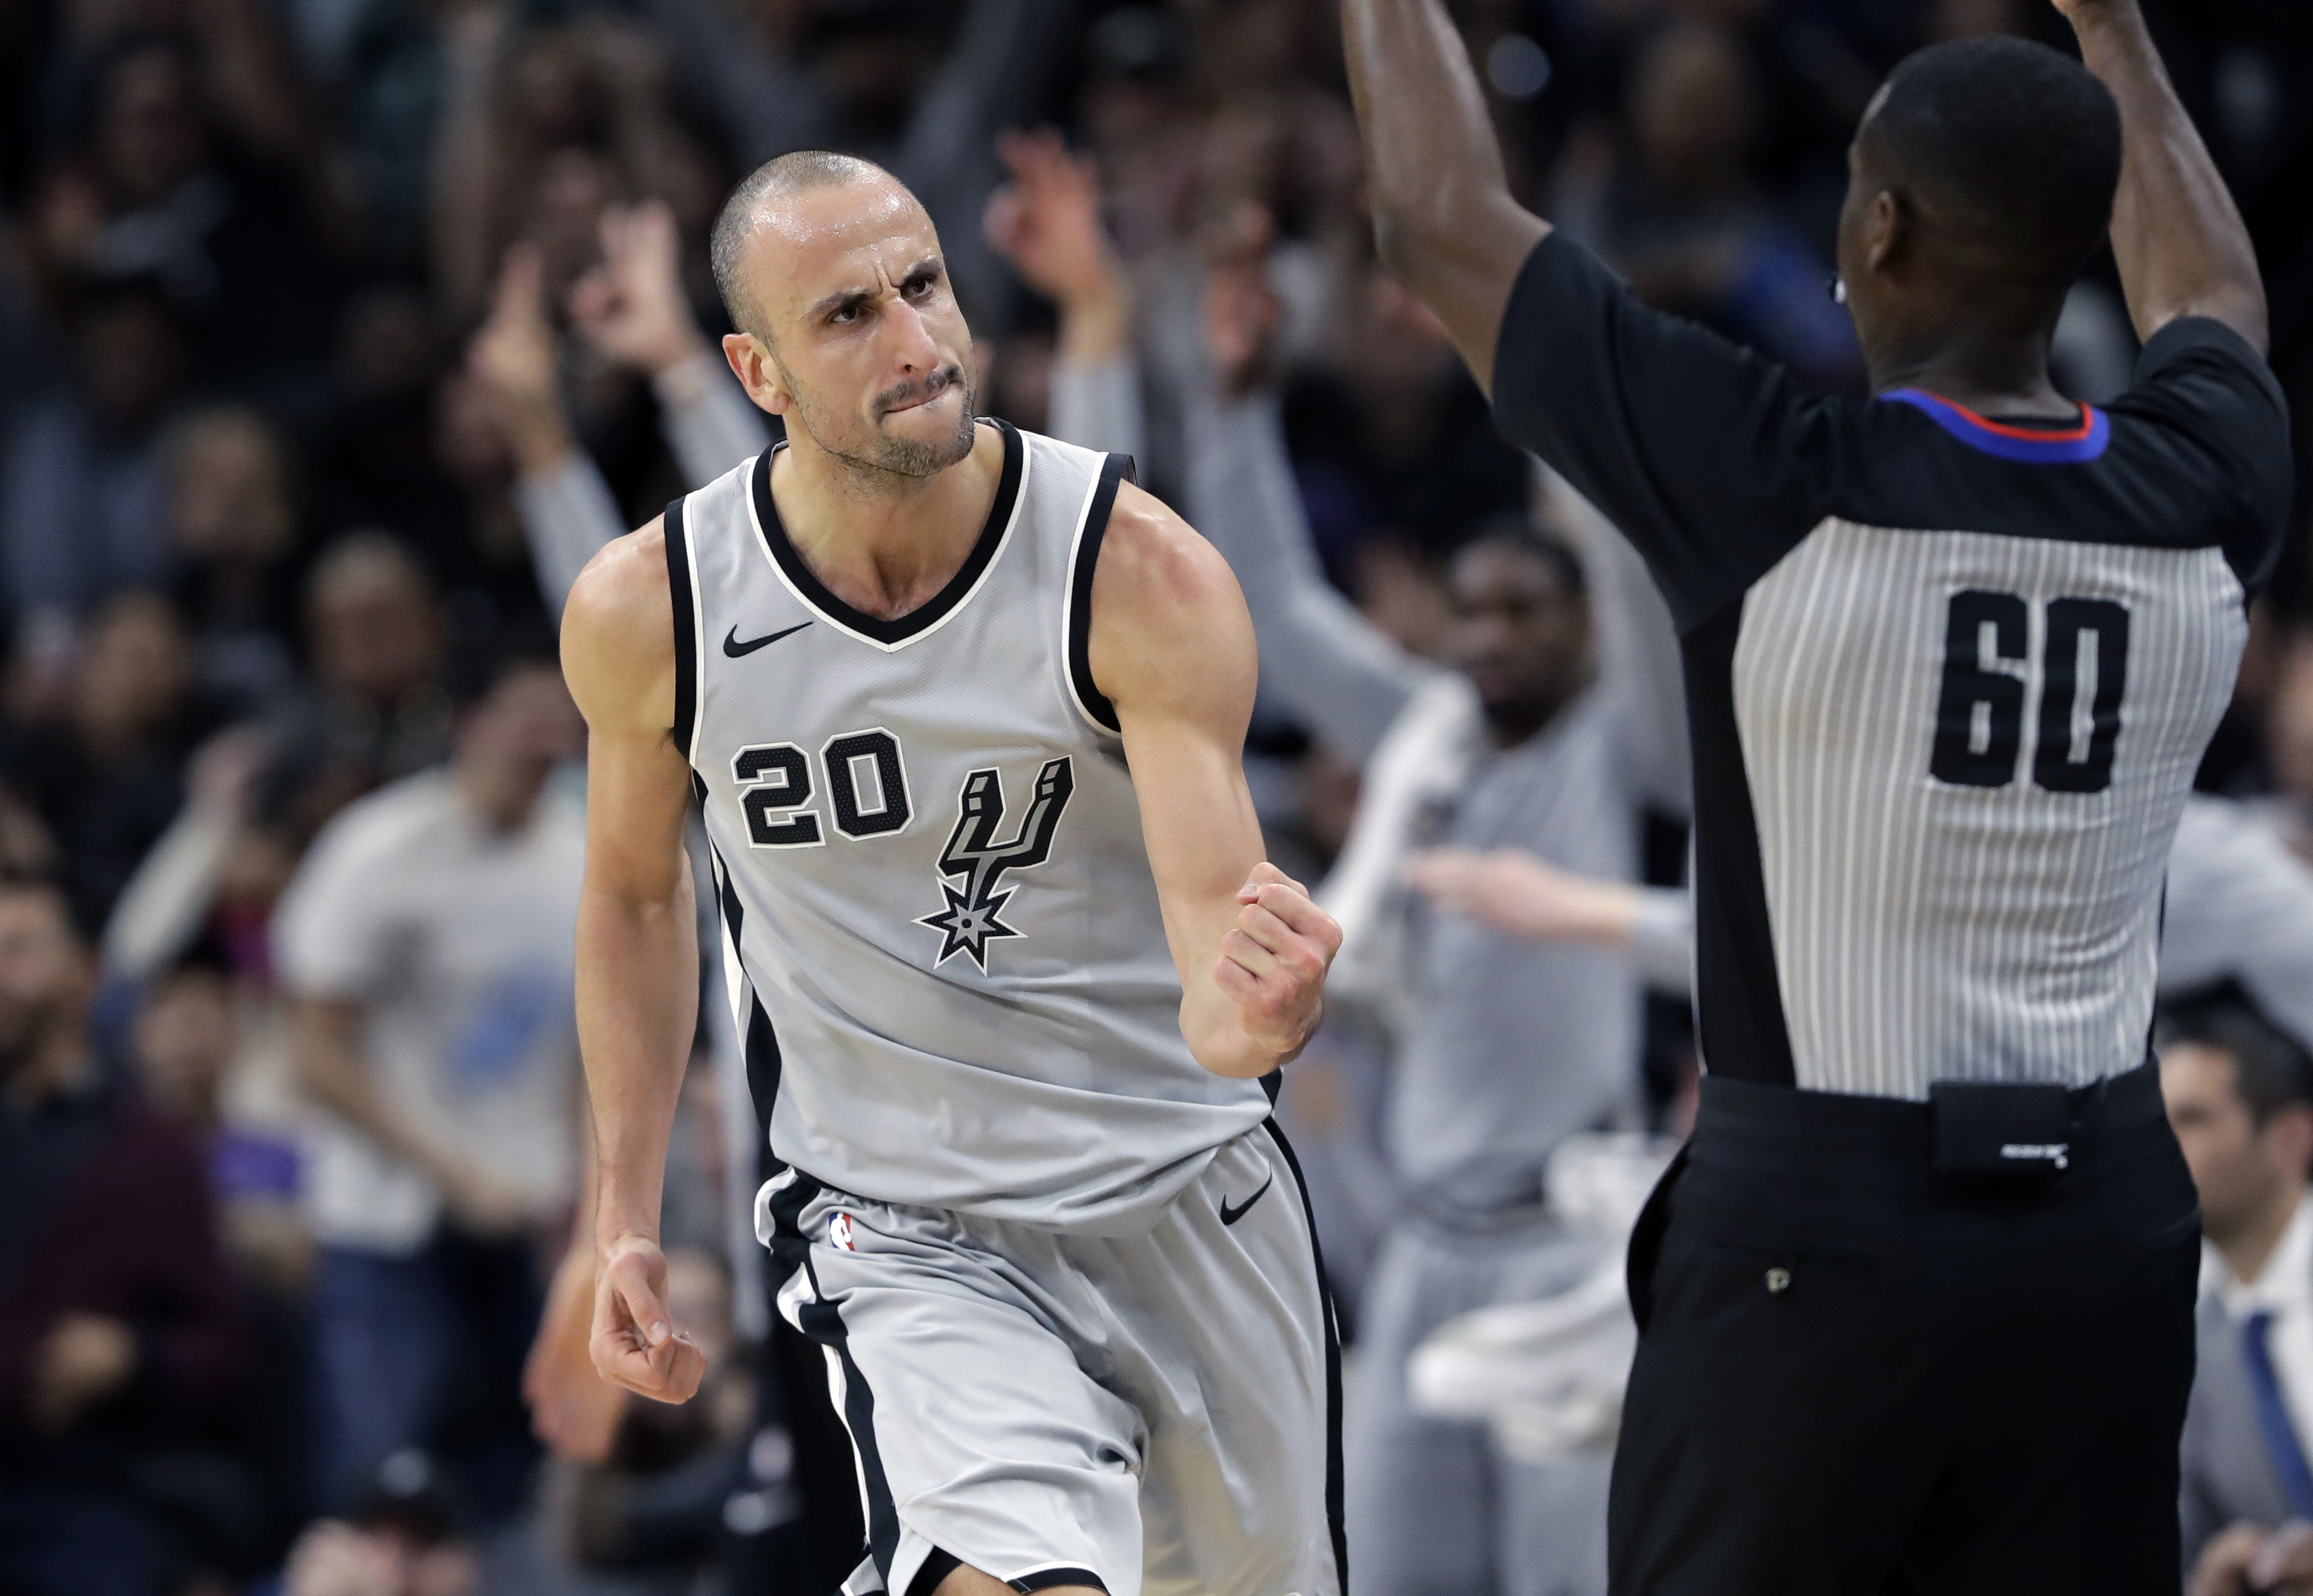 Shams Charania on the Greatness of Manu Ginobili After His Jersey